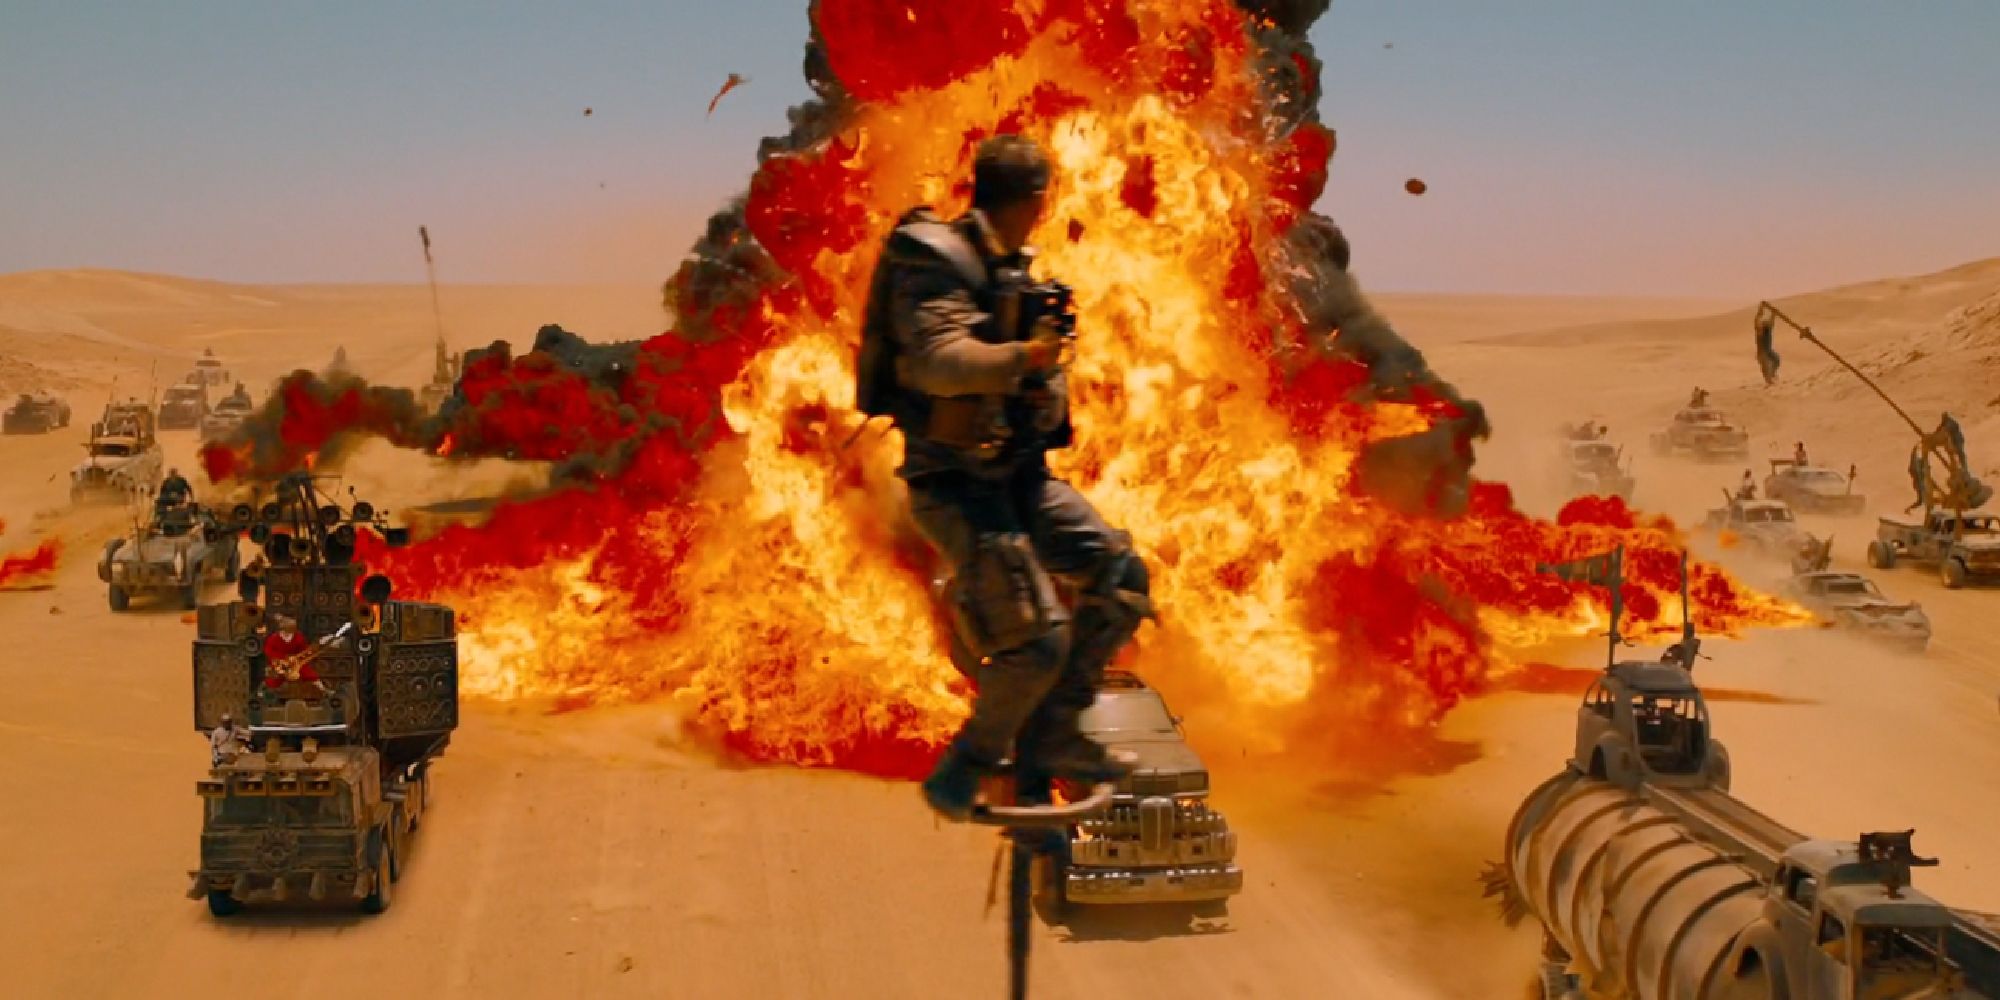 Grosse explosion dans Mad Max Fury Road - 2015